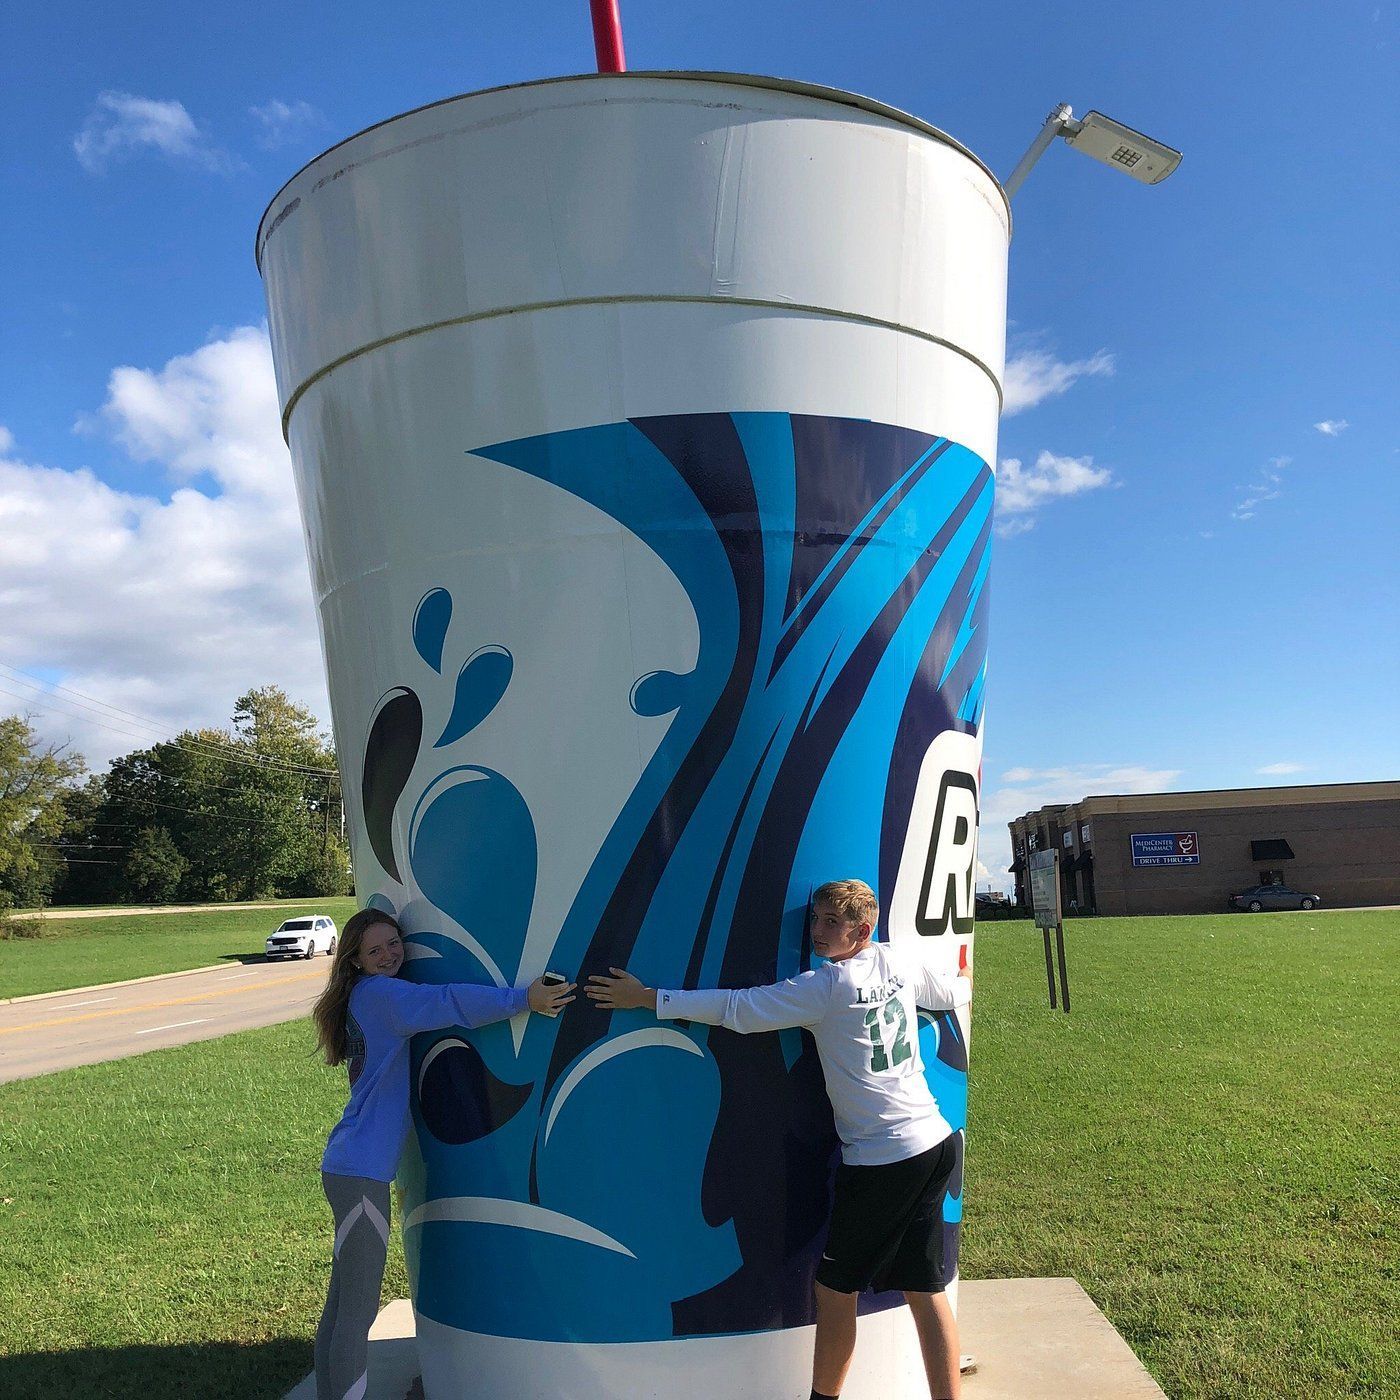 World's Largest Cup of Soft Drink: world record in Cape Giradeau, Missouri